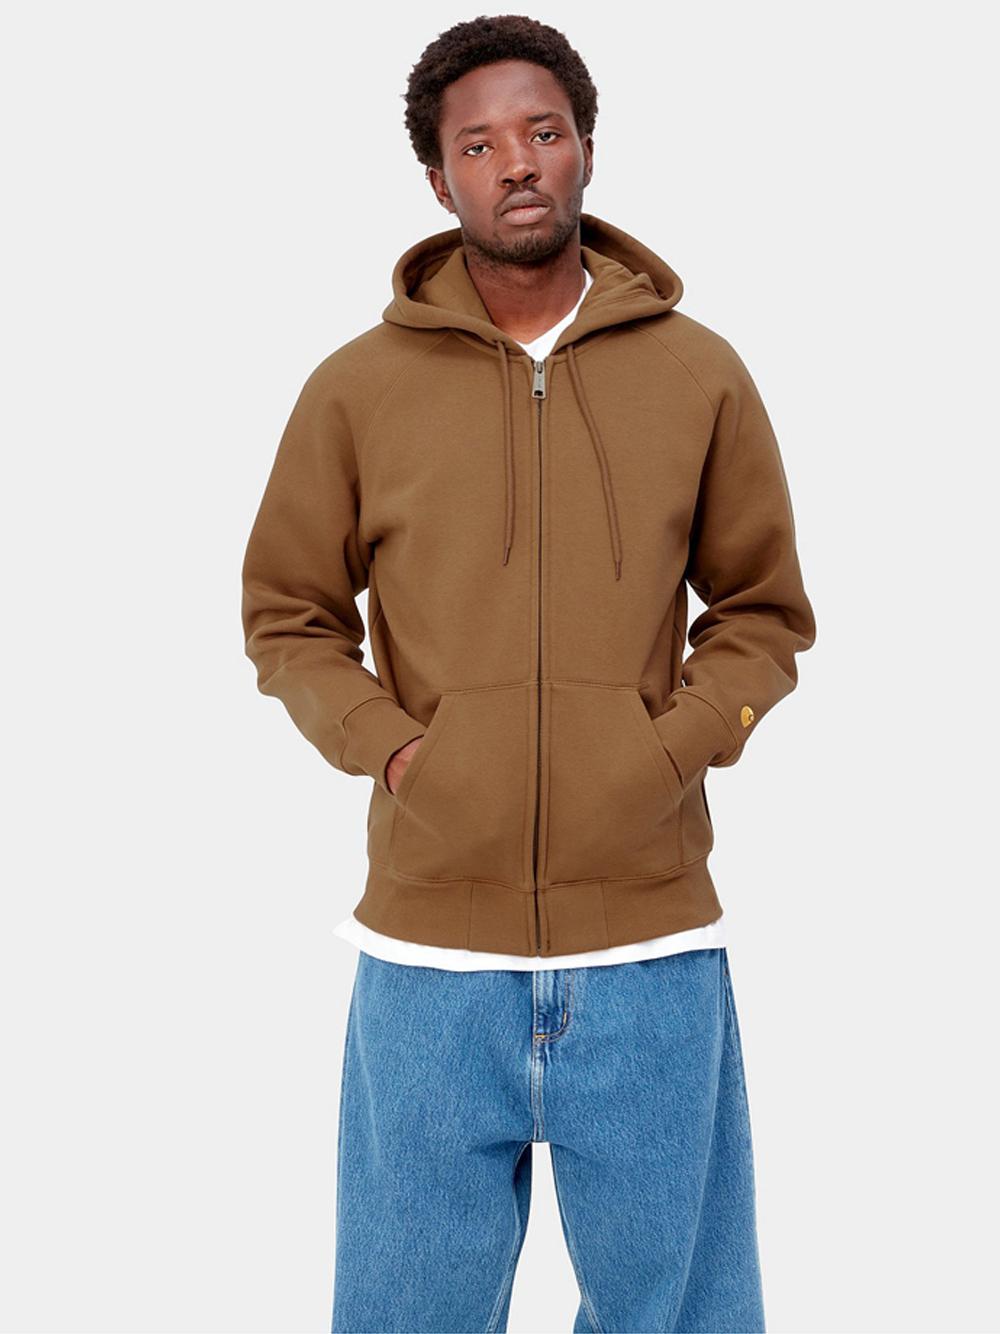 Carhartt WIP Hooded Chase Jacket Brown In Cotton for Men | Lyst